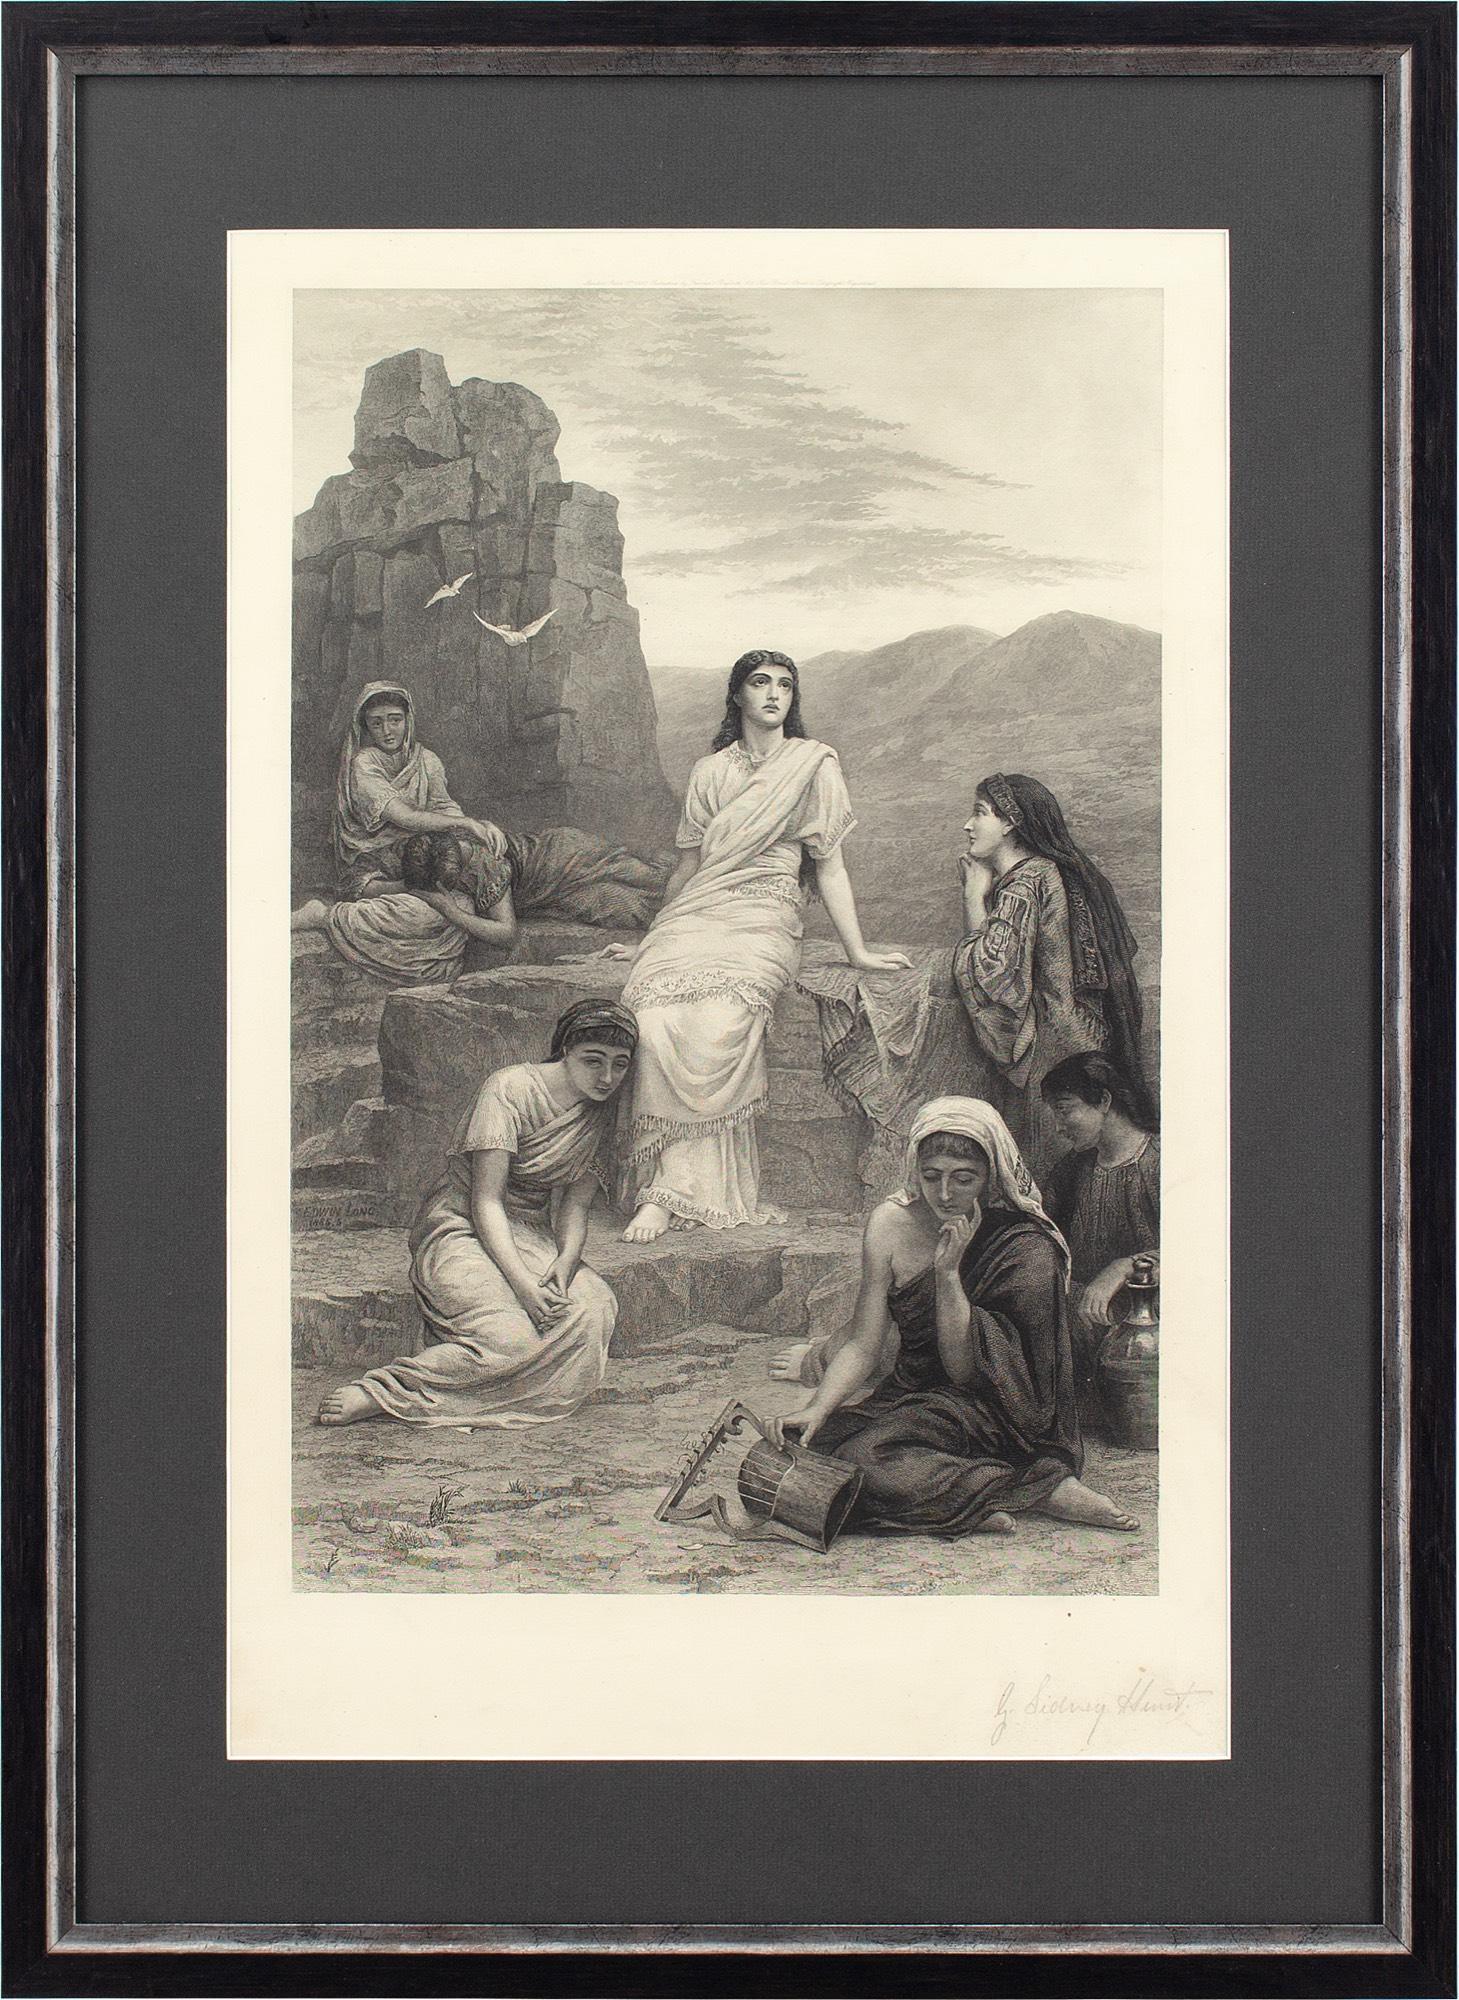 This late 19th-century mixed-method engraving by George Sidney Hunt (1856-1917) after Edwin Long RA (1829-1891) is one in a series of three depicting the Old Testament story of Jephthah. Here, we see Jephthah’s daughter contemplating her fate during